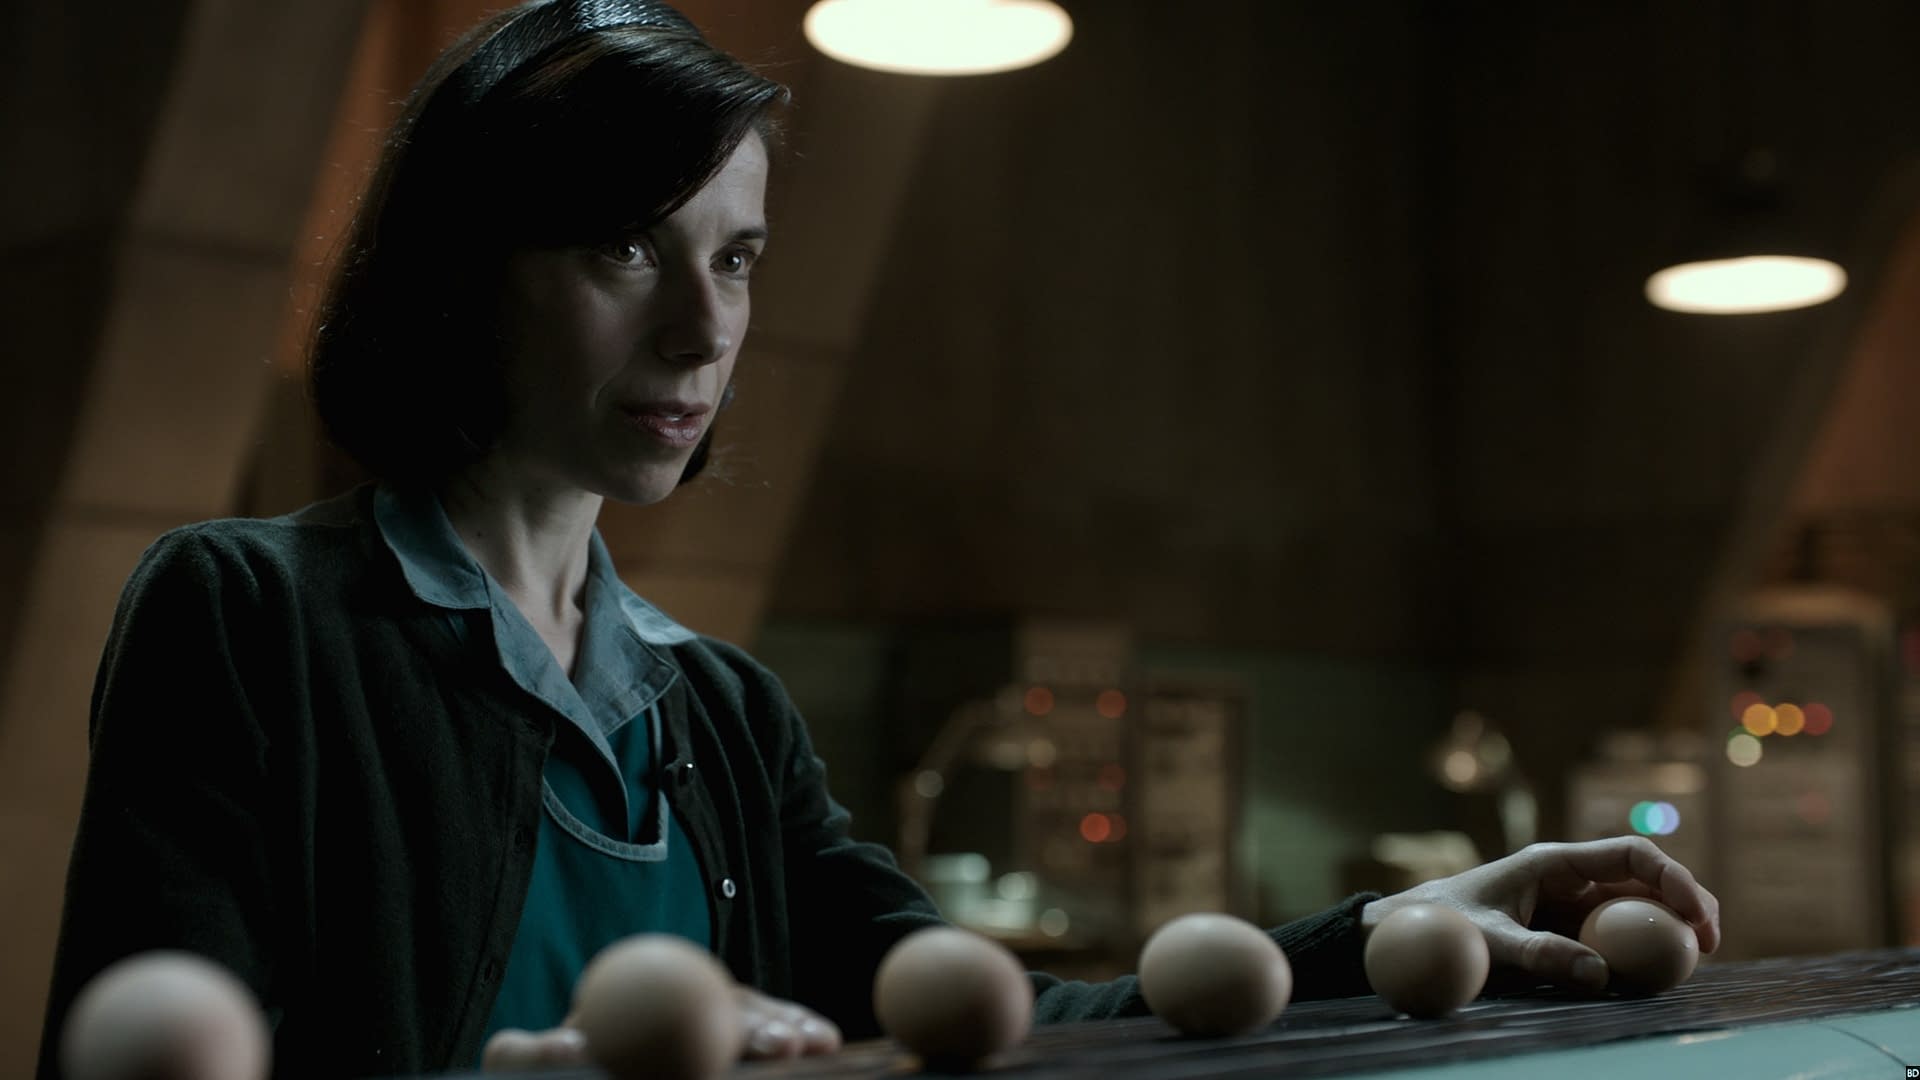 4 New HQ Images From Guillermo Del Toro's 'The Shape Of Water'